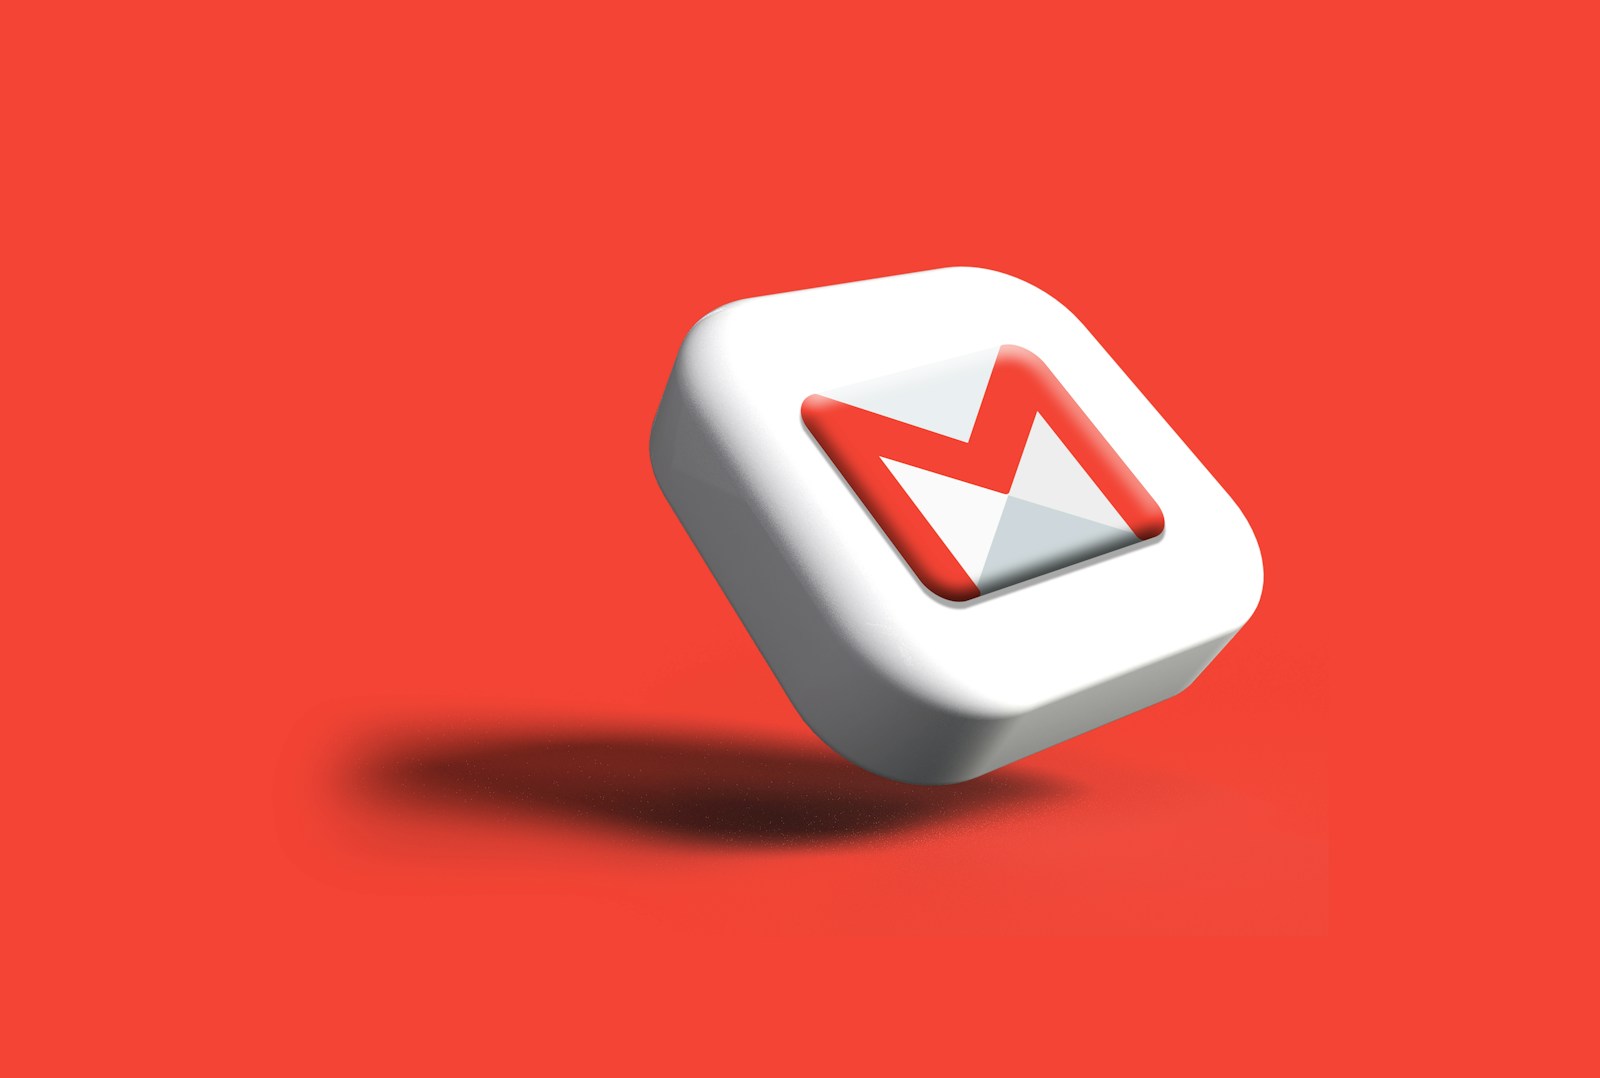 Gmail a close up of a white and red object on a red background Interface Enhancements and Redesigns